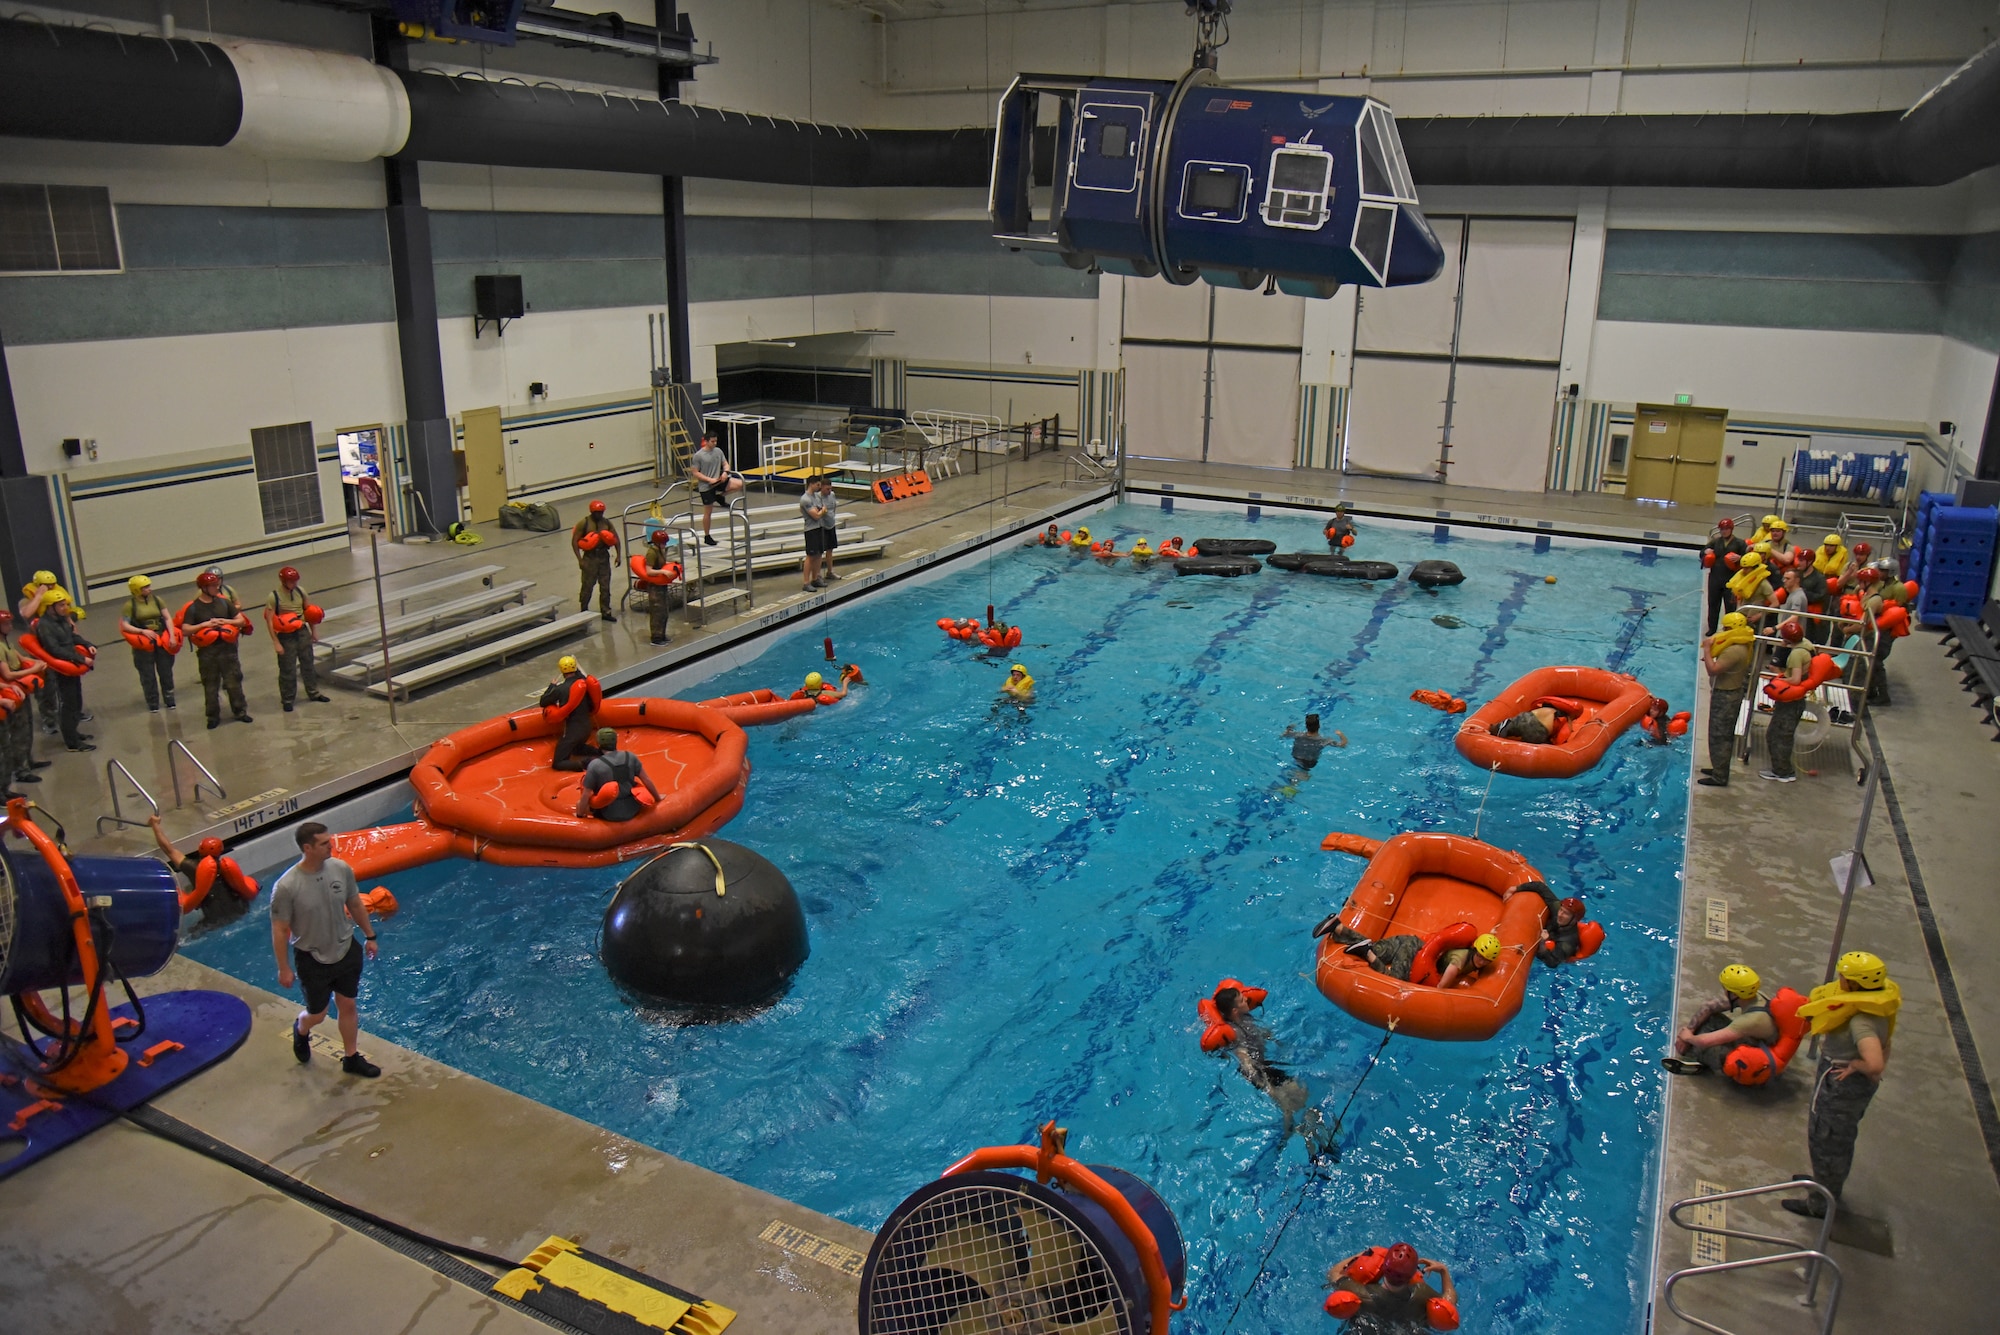 Survival, Evasion, Resistance and Escape specialists assigned to the 336th Training Group conduct water survival training with a class of 43 aircrew members at Fairchild Air Force Base, Washington, March 21, 2019. The primary focus of water survival training is to prepare aircrew members for emergency aircraft situations and surviving on the ocean until they can be rescued and recovered. (U.S. Air Force photo by Staff Sgt. Mackenzie Mendez)